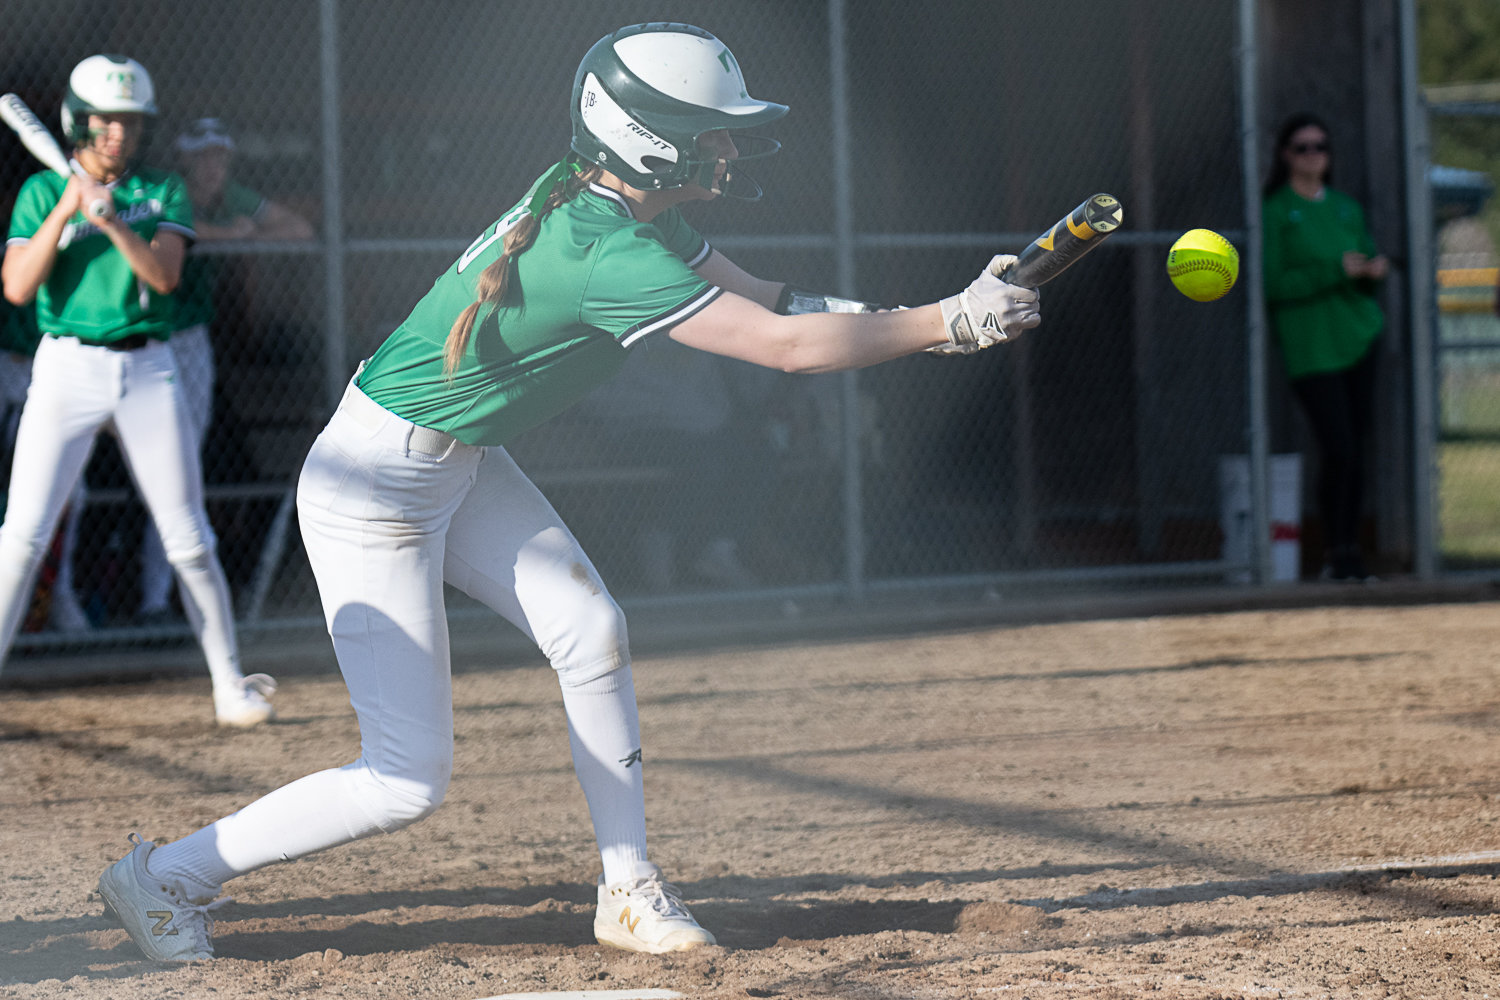 Erika Schock puts down a bunt to start a rally in the sixth inning of Tumwater's 5-3 win over Rochester on March 29.